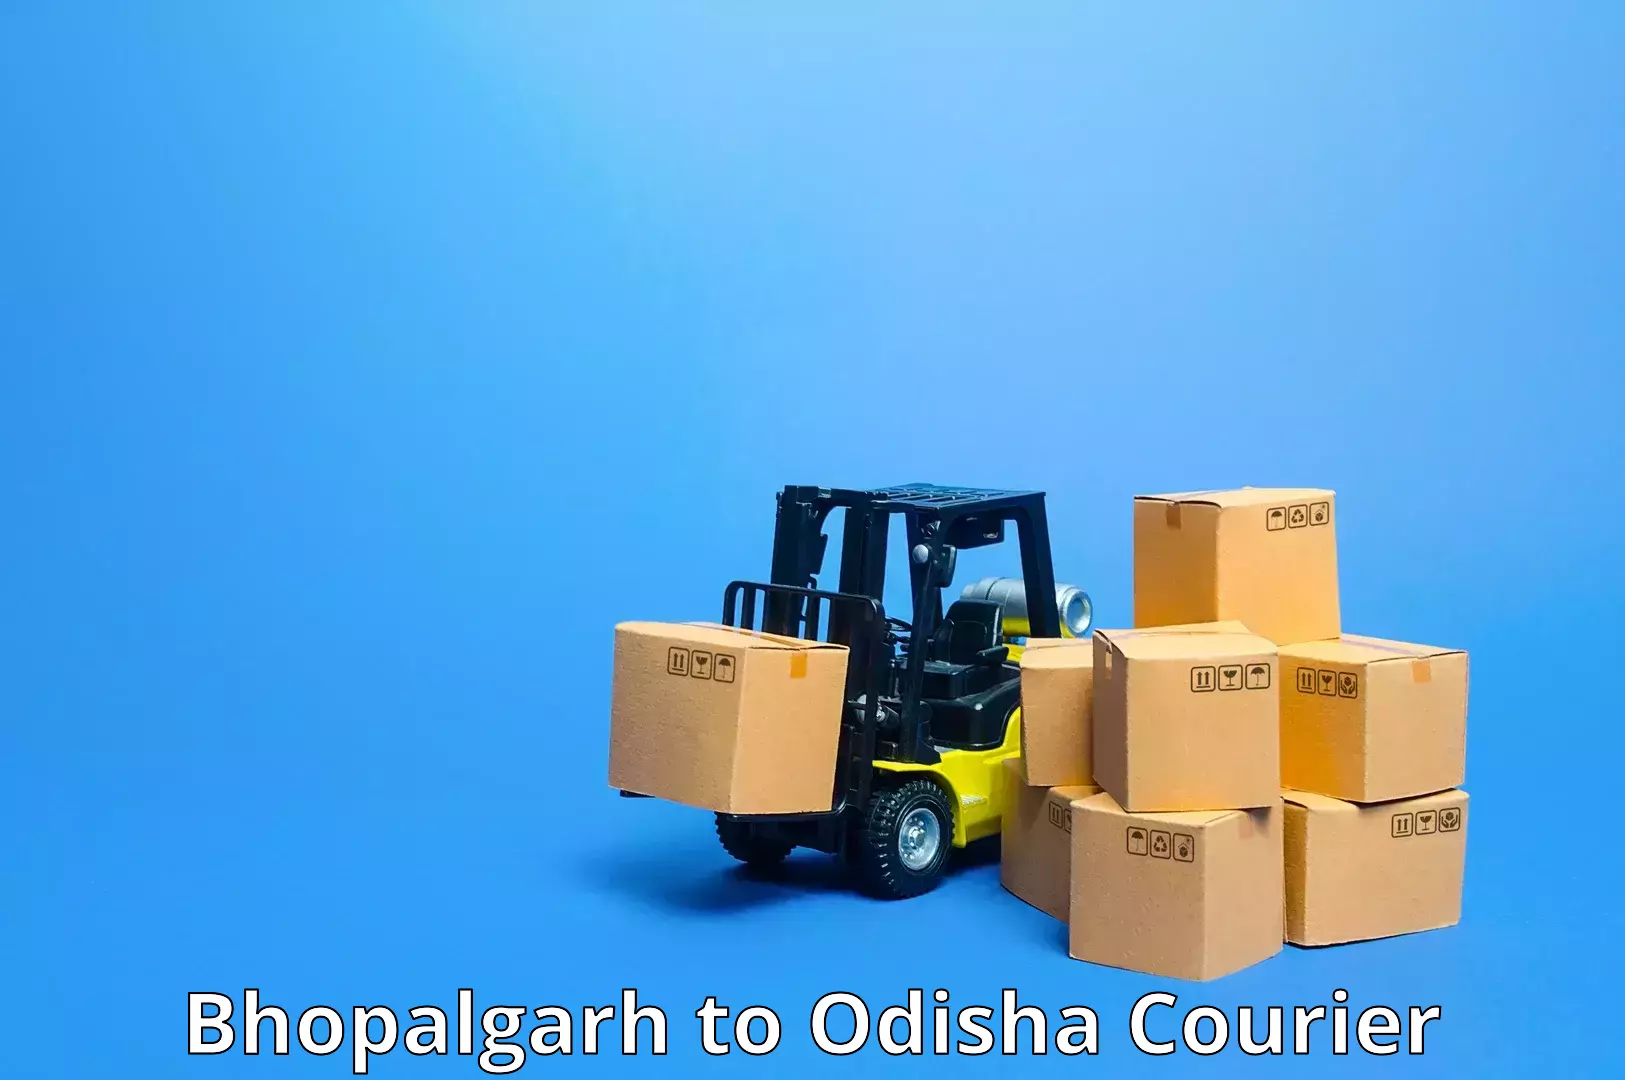 Streamlined delivery processes Bhopalgarh to Chatrapur